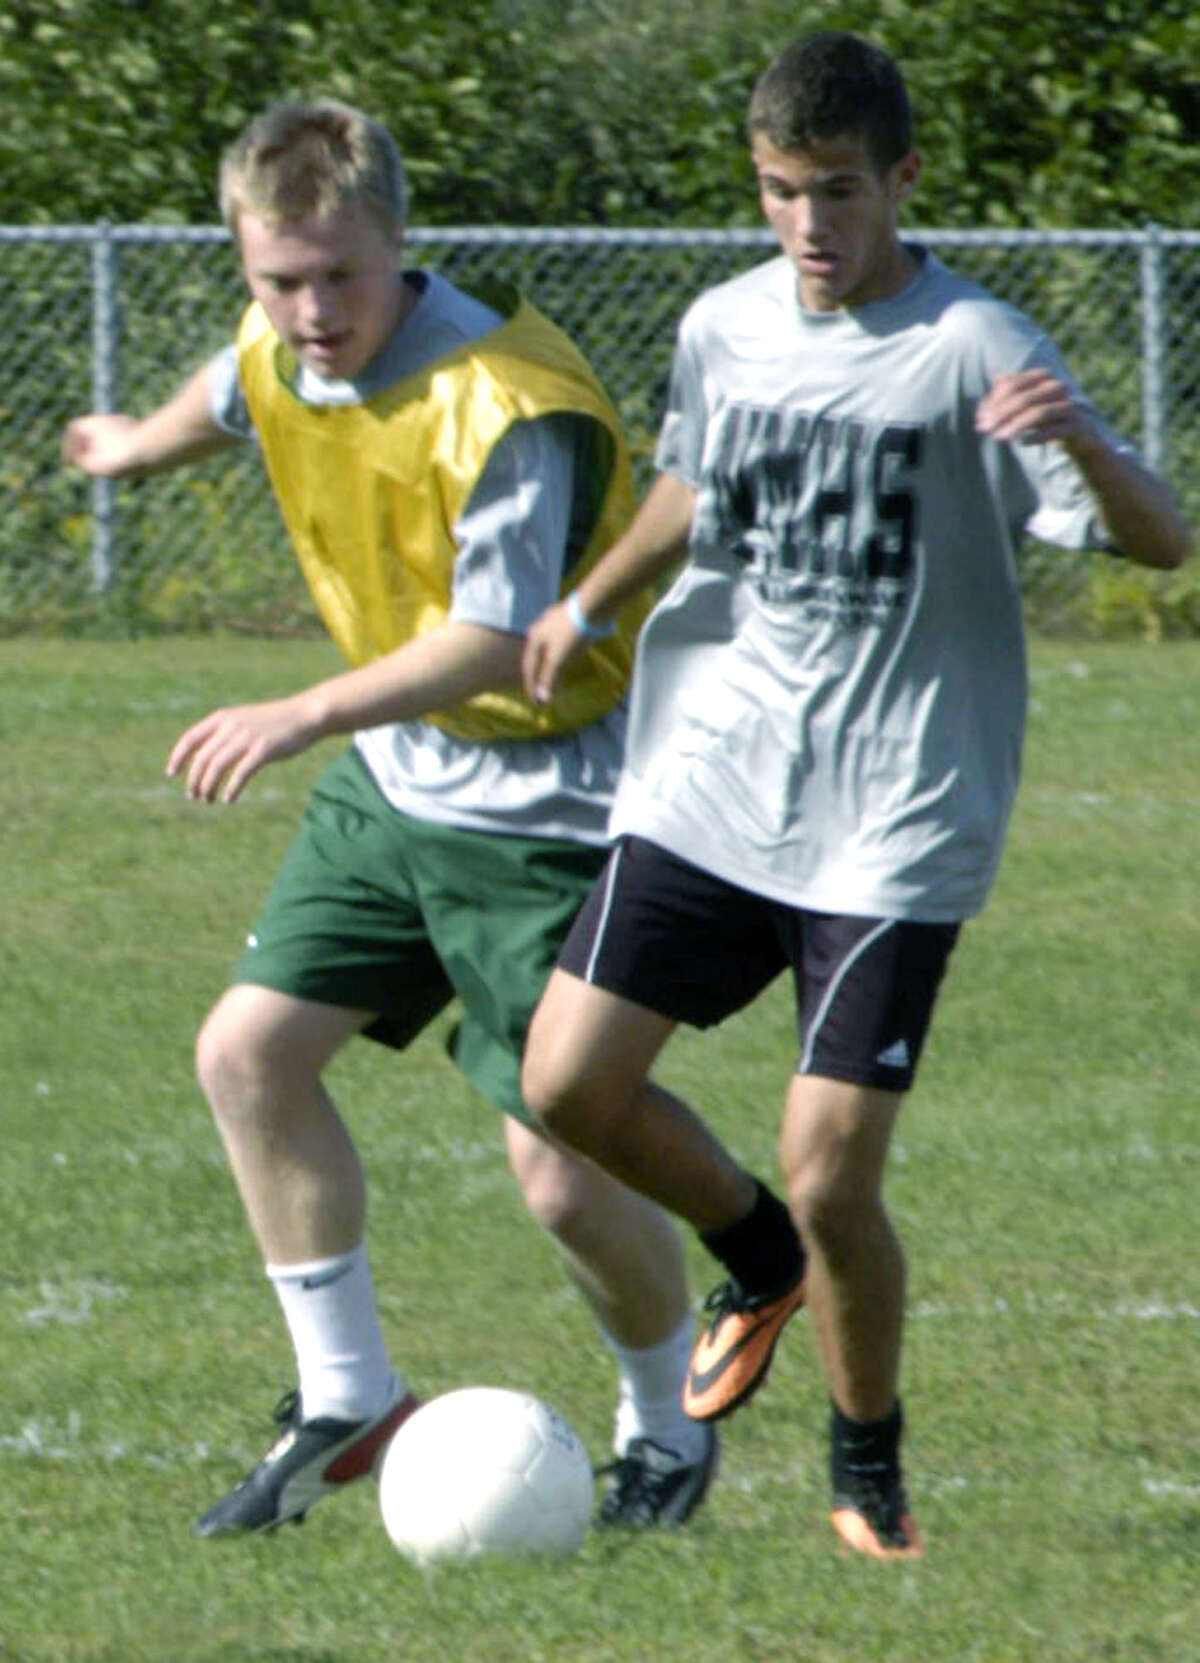 Green Wave players compete during pre-season practice for New Milford High School boys' soccer. September 2013